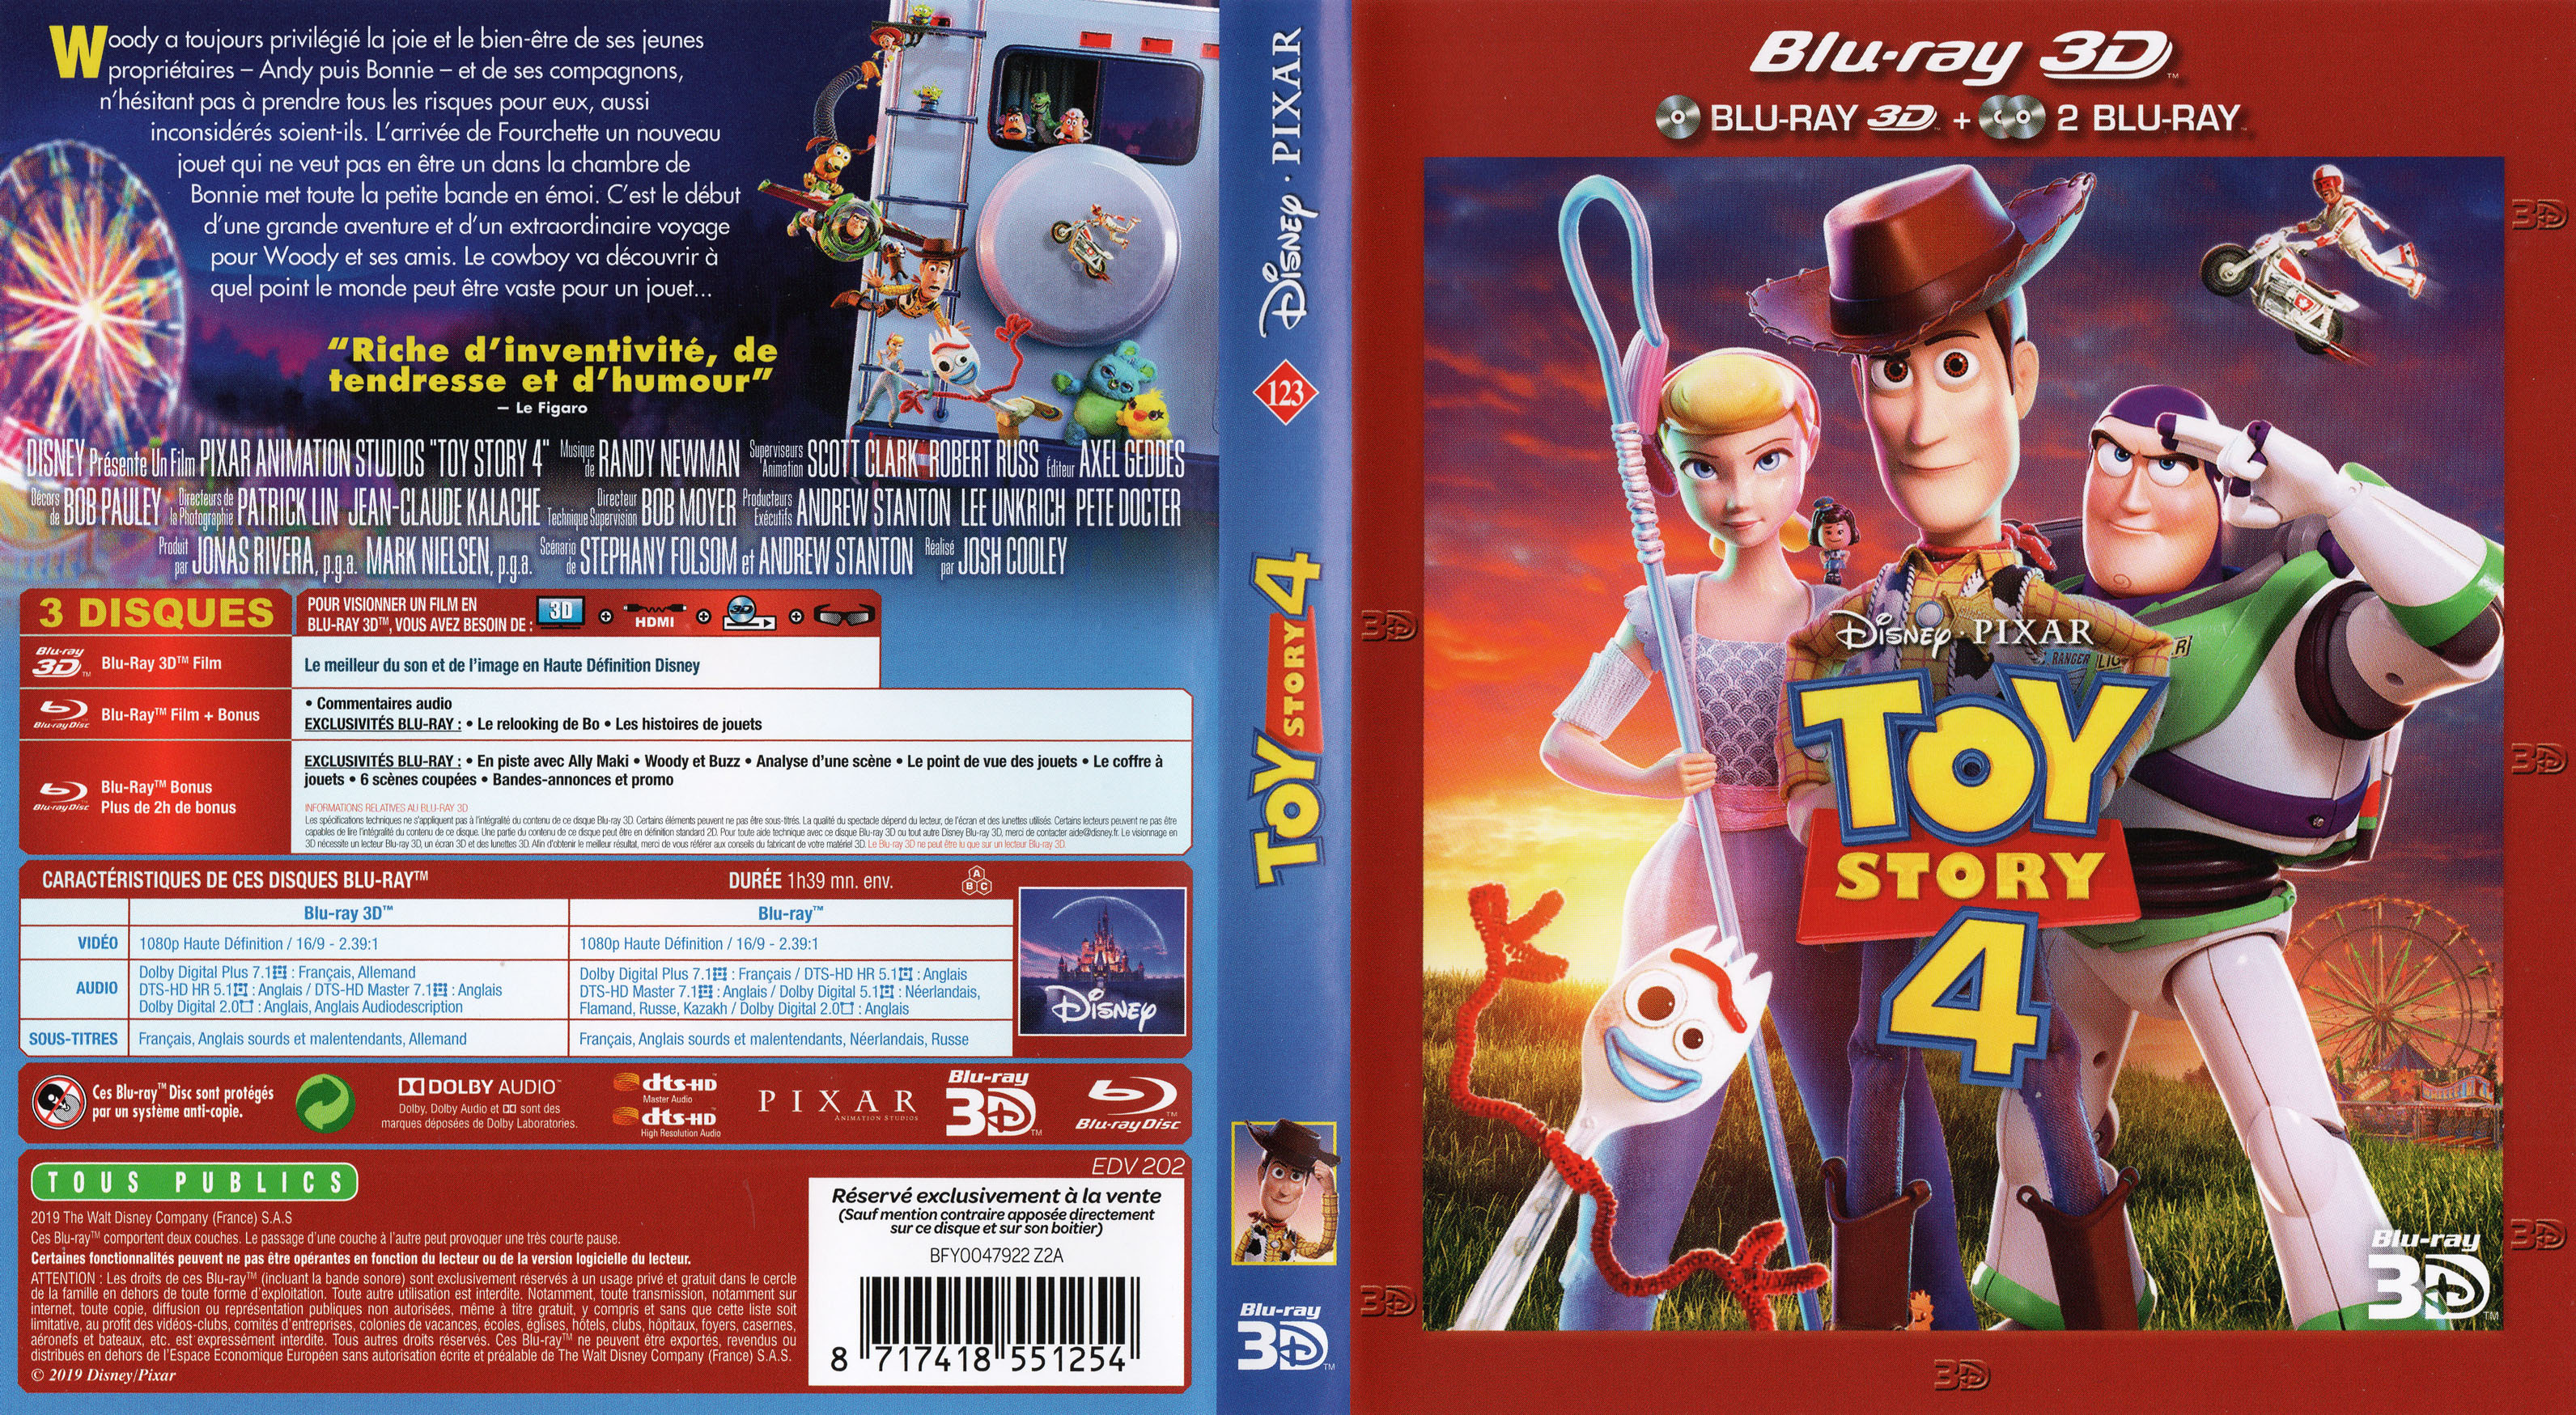 Jaquette DVD Toy Story 4 3D (BLU-RAY)